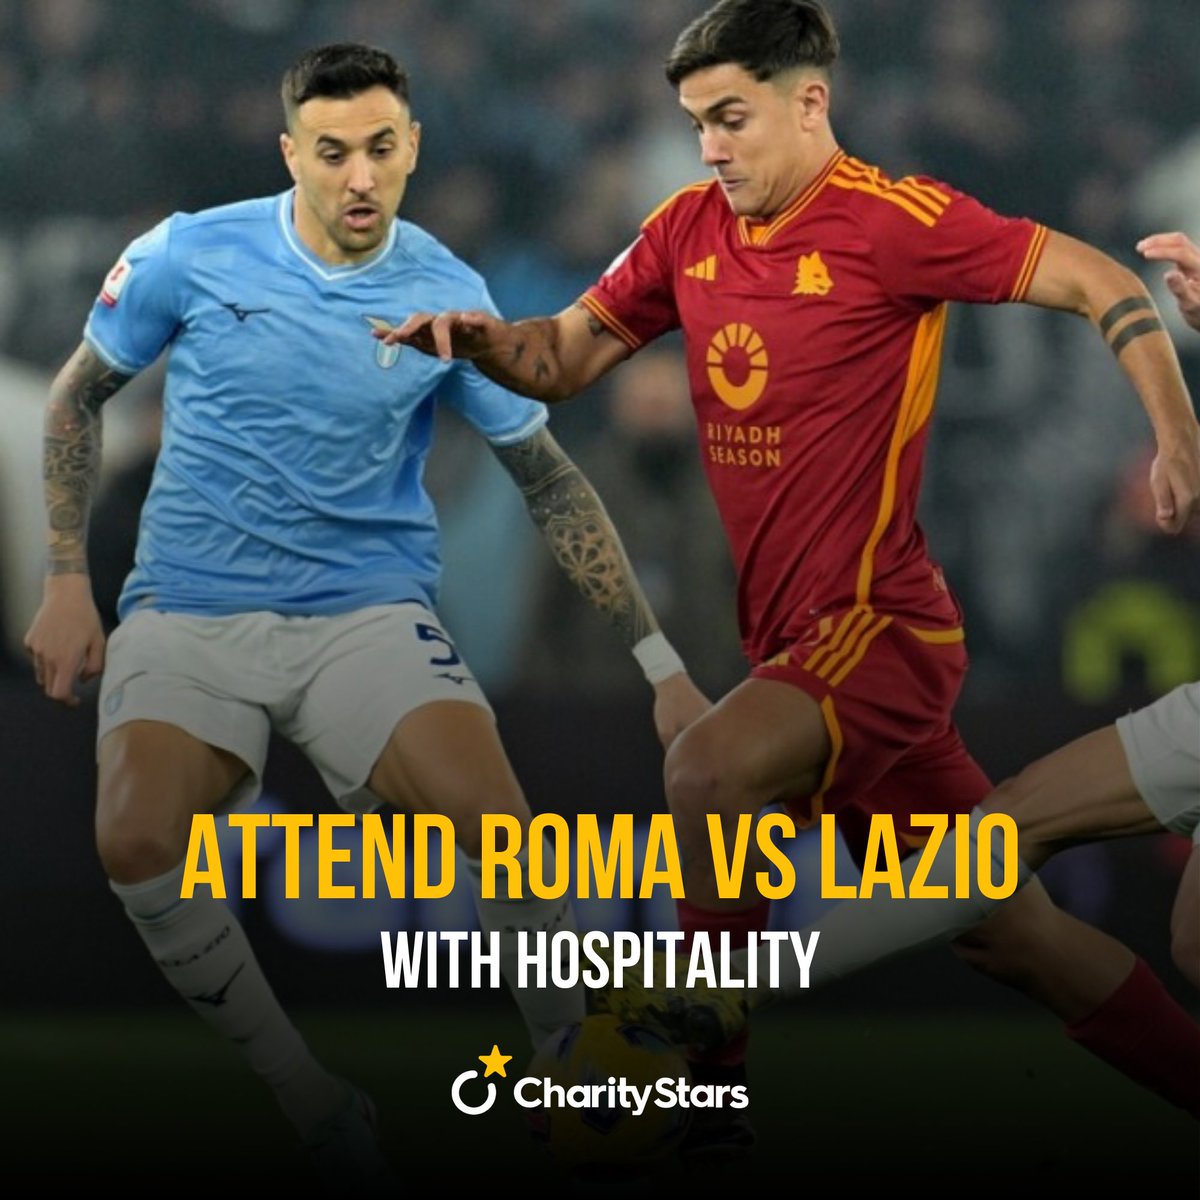 AS Roma fans, this auction is for you 🟡🔴 Attend the eagerly awaited Roma vs. Lazio match from the first red ring and enjoy the experience to the full thanks to hospitality access! Bid now 👉 charitystars.com/product/assist…! #CharityStars #RomaLazio #Derby